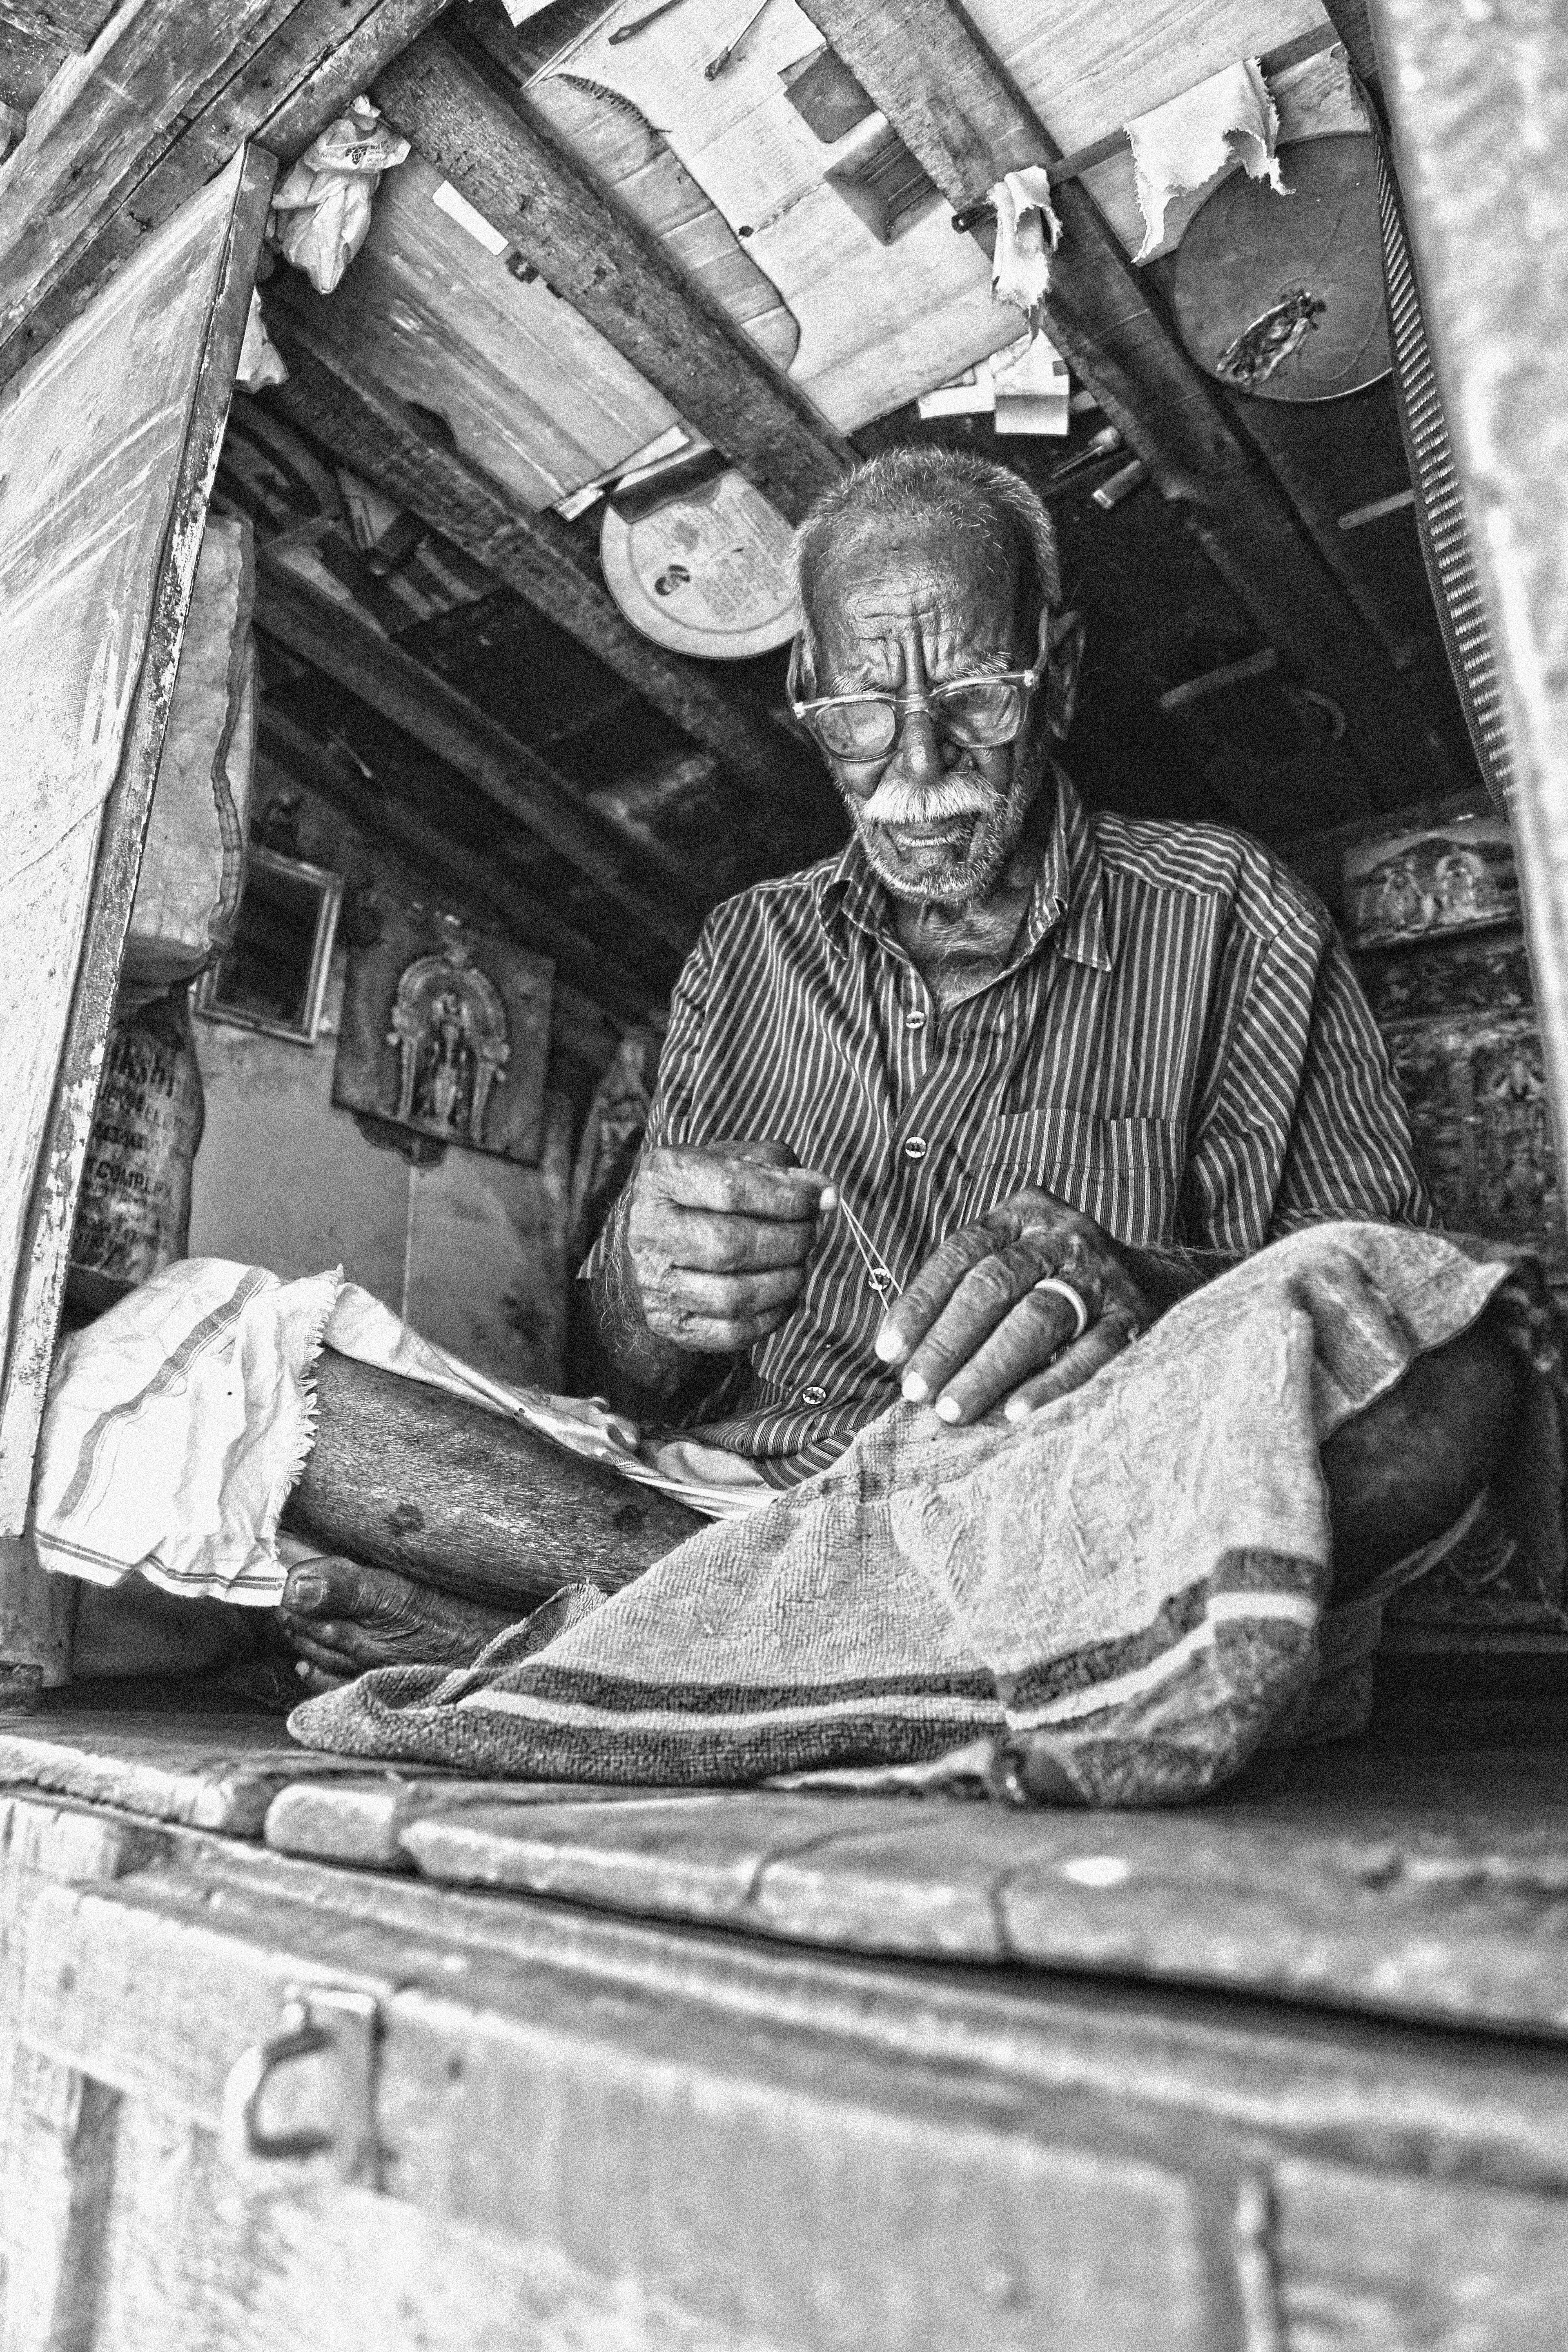 grayscale photography of man wearing eyeglasses while sewing clothe